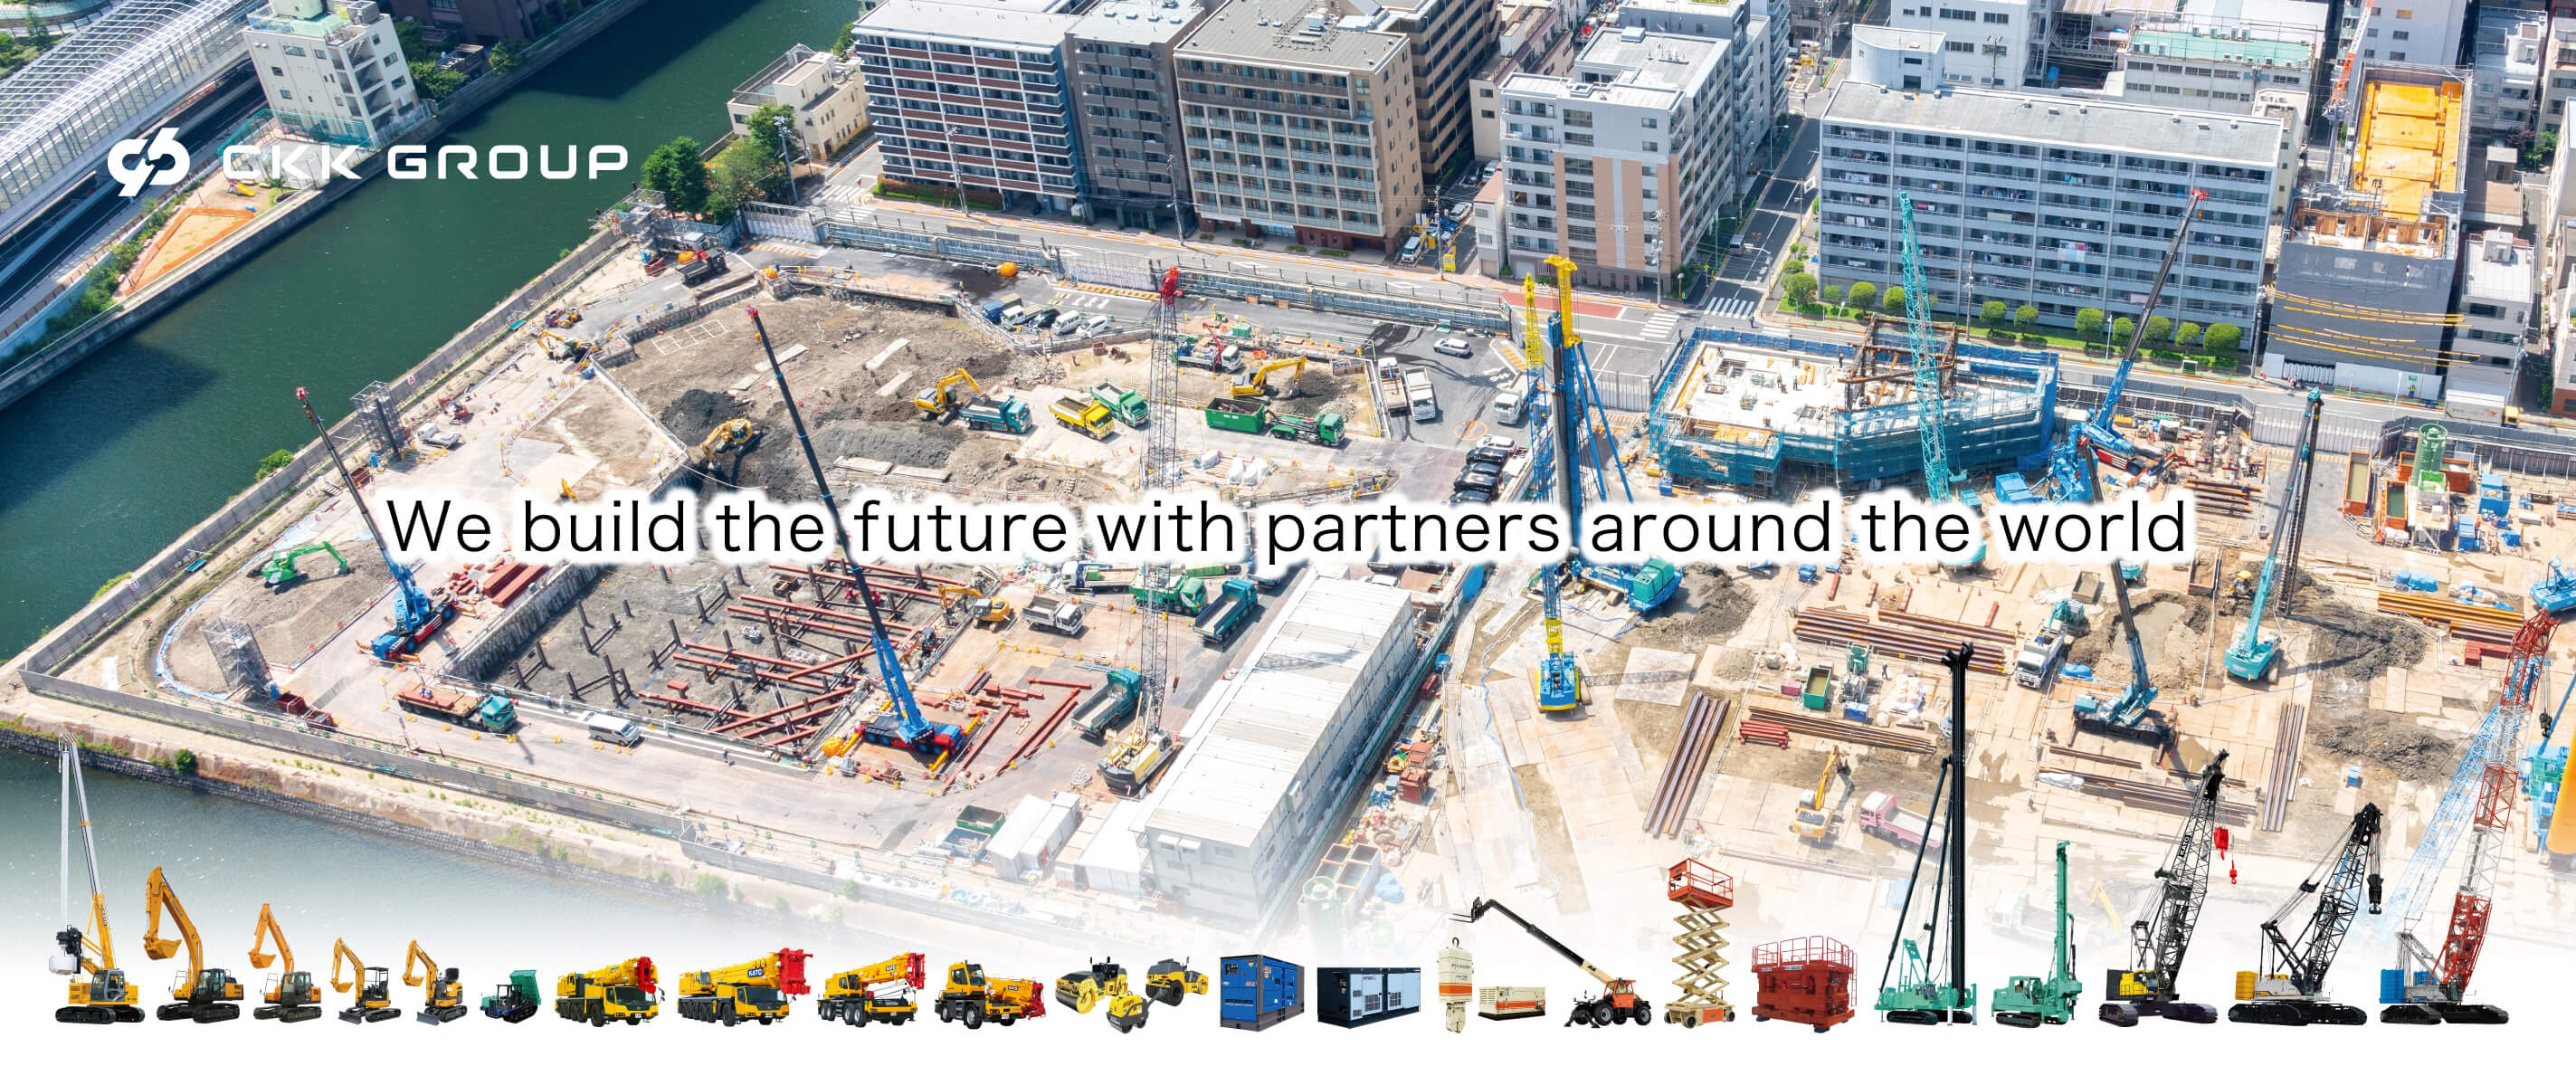 We build the future with partners around the world